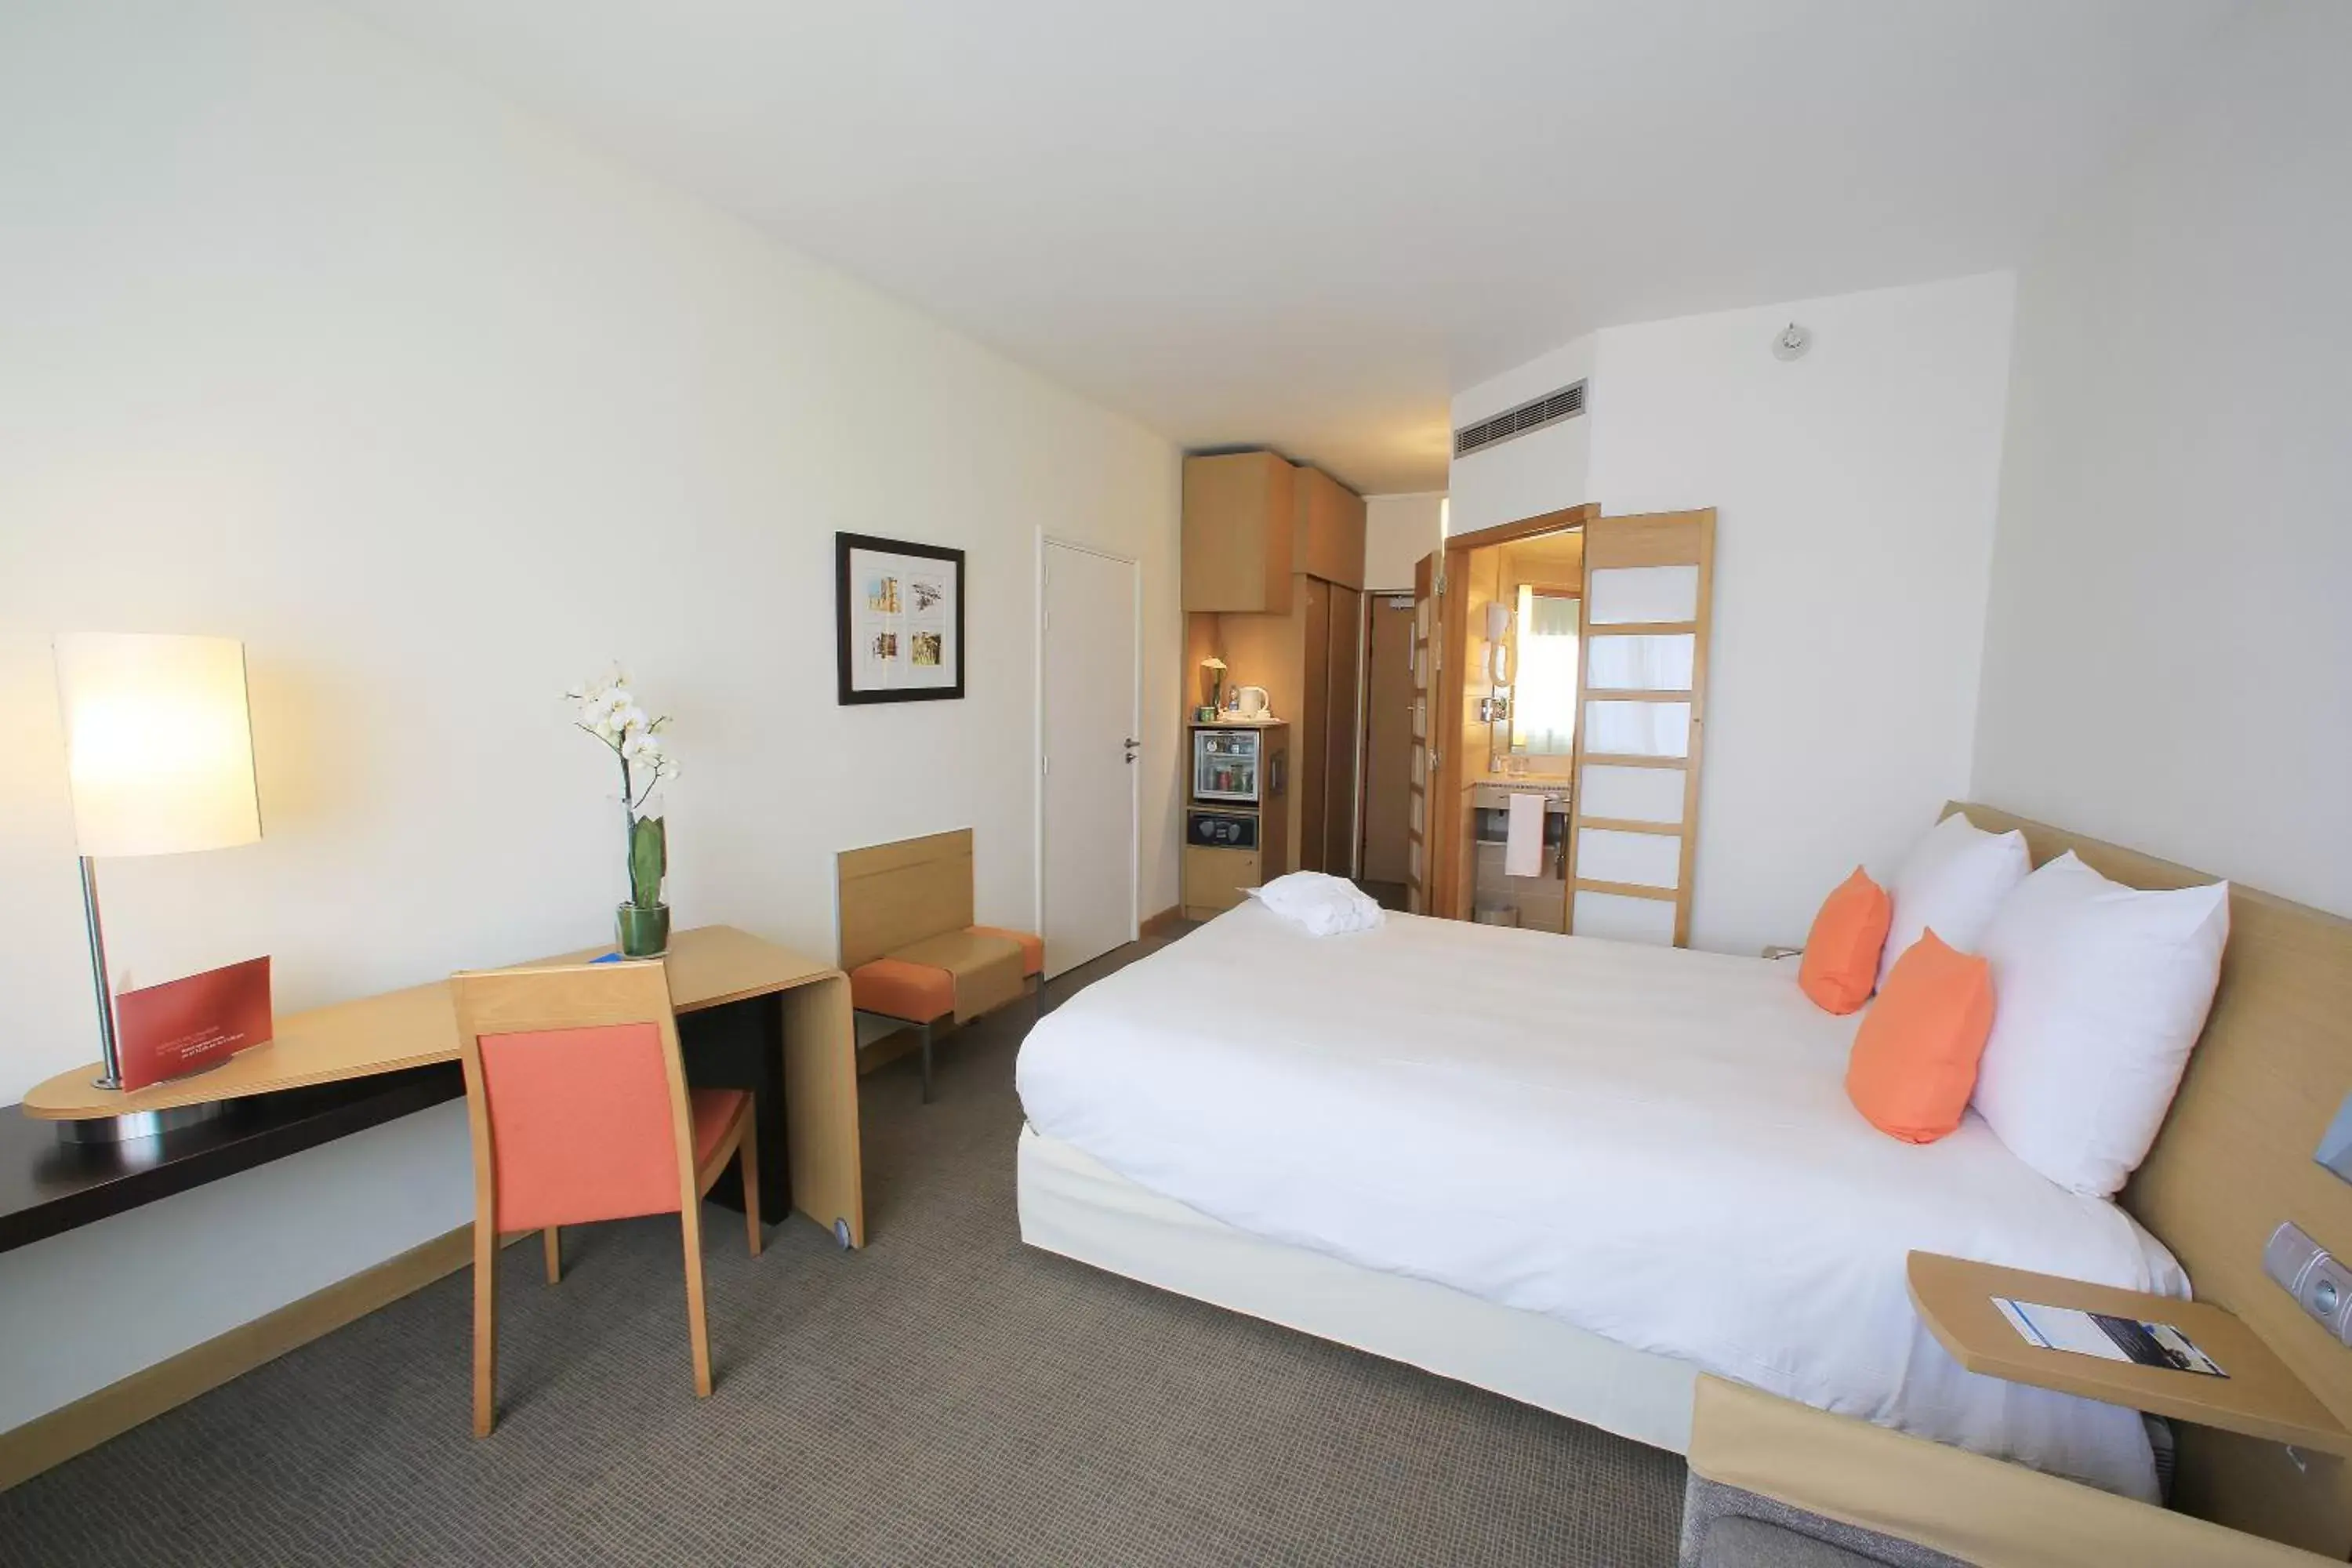 Standard Room - 1 Queen Size Bed and Sofa in Novotel Casablanca City Center